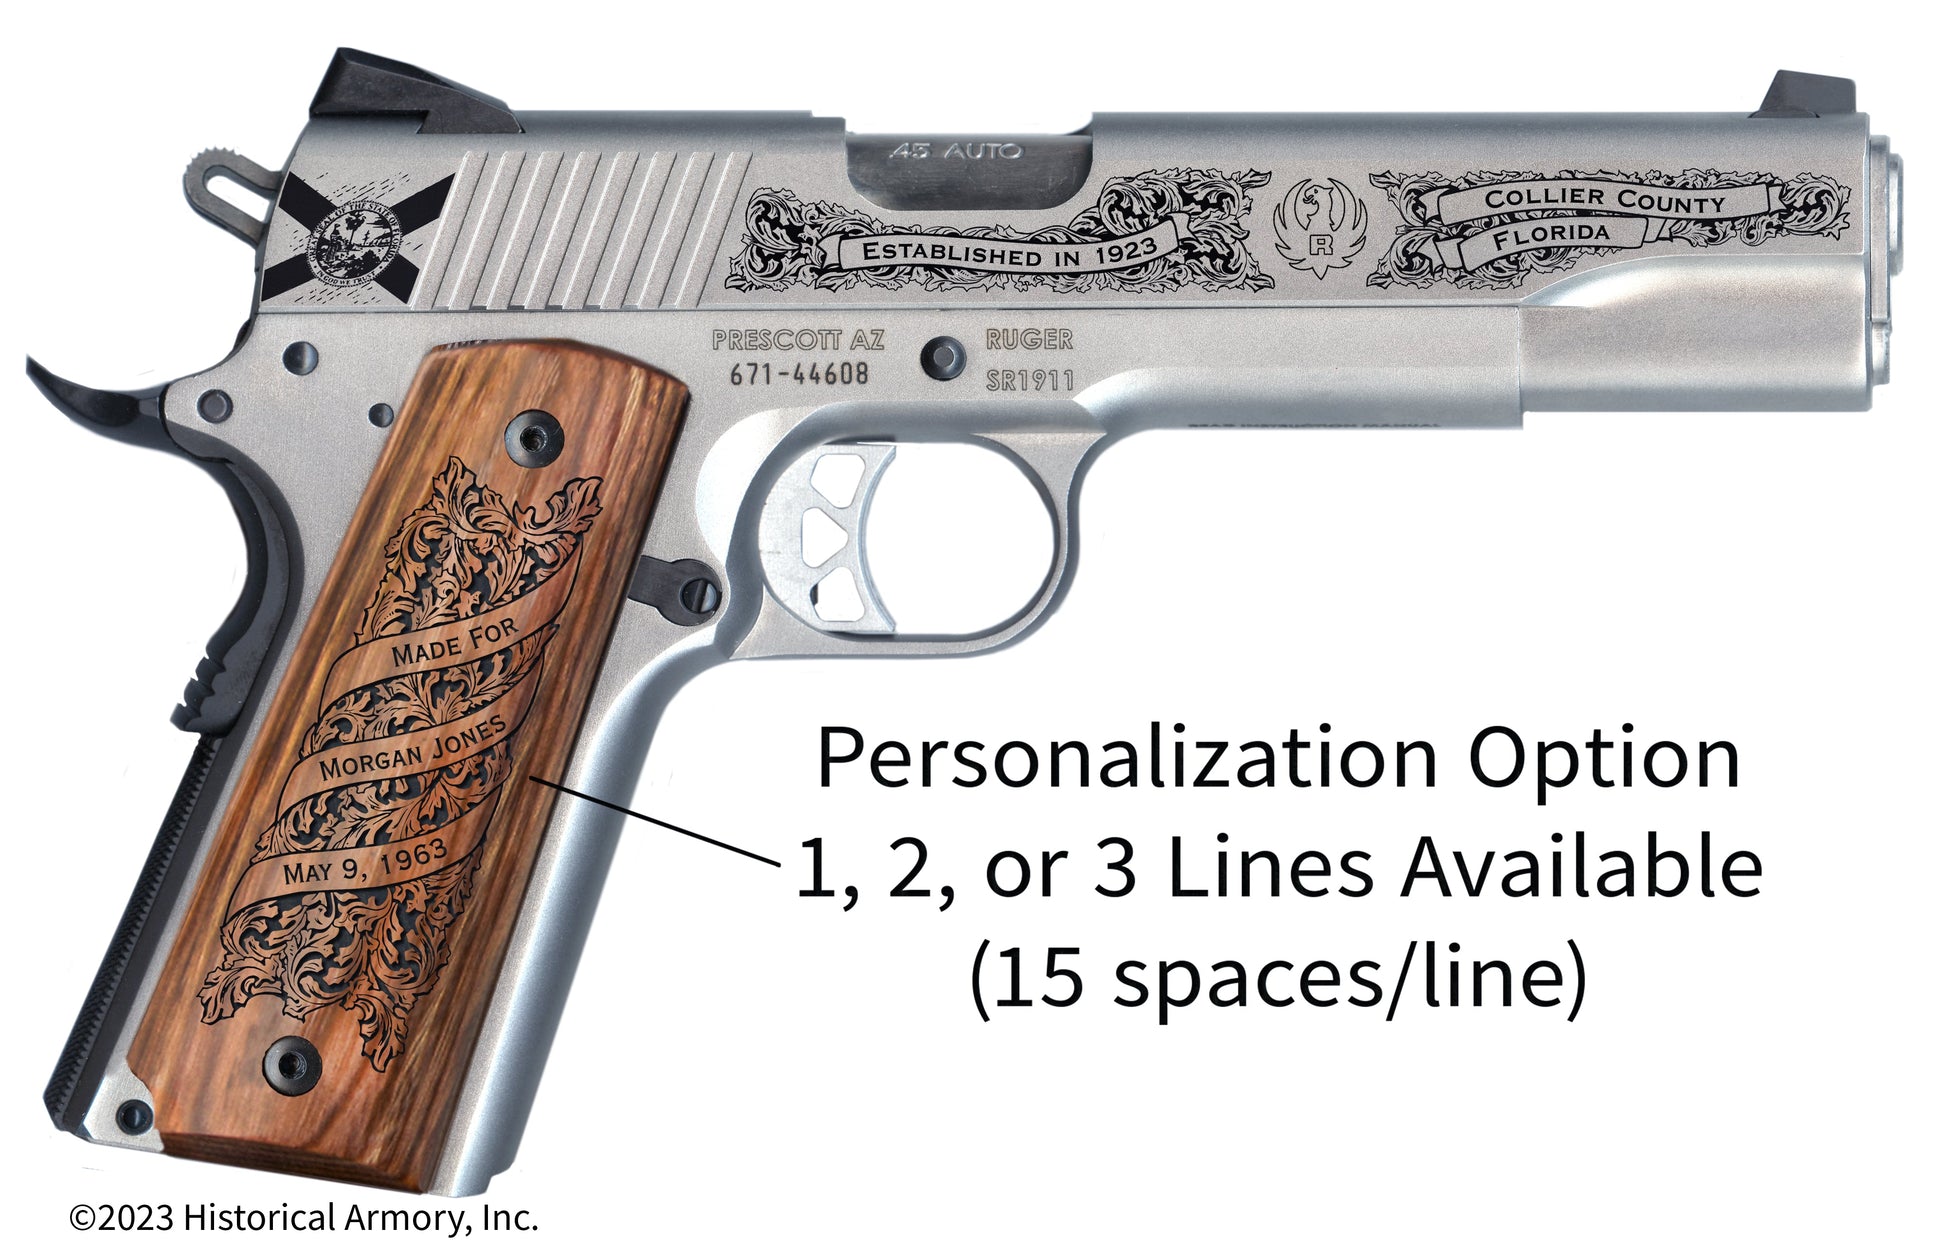 Collier County Florida Personalized Engraved .45 Auto Ruger 1911